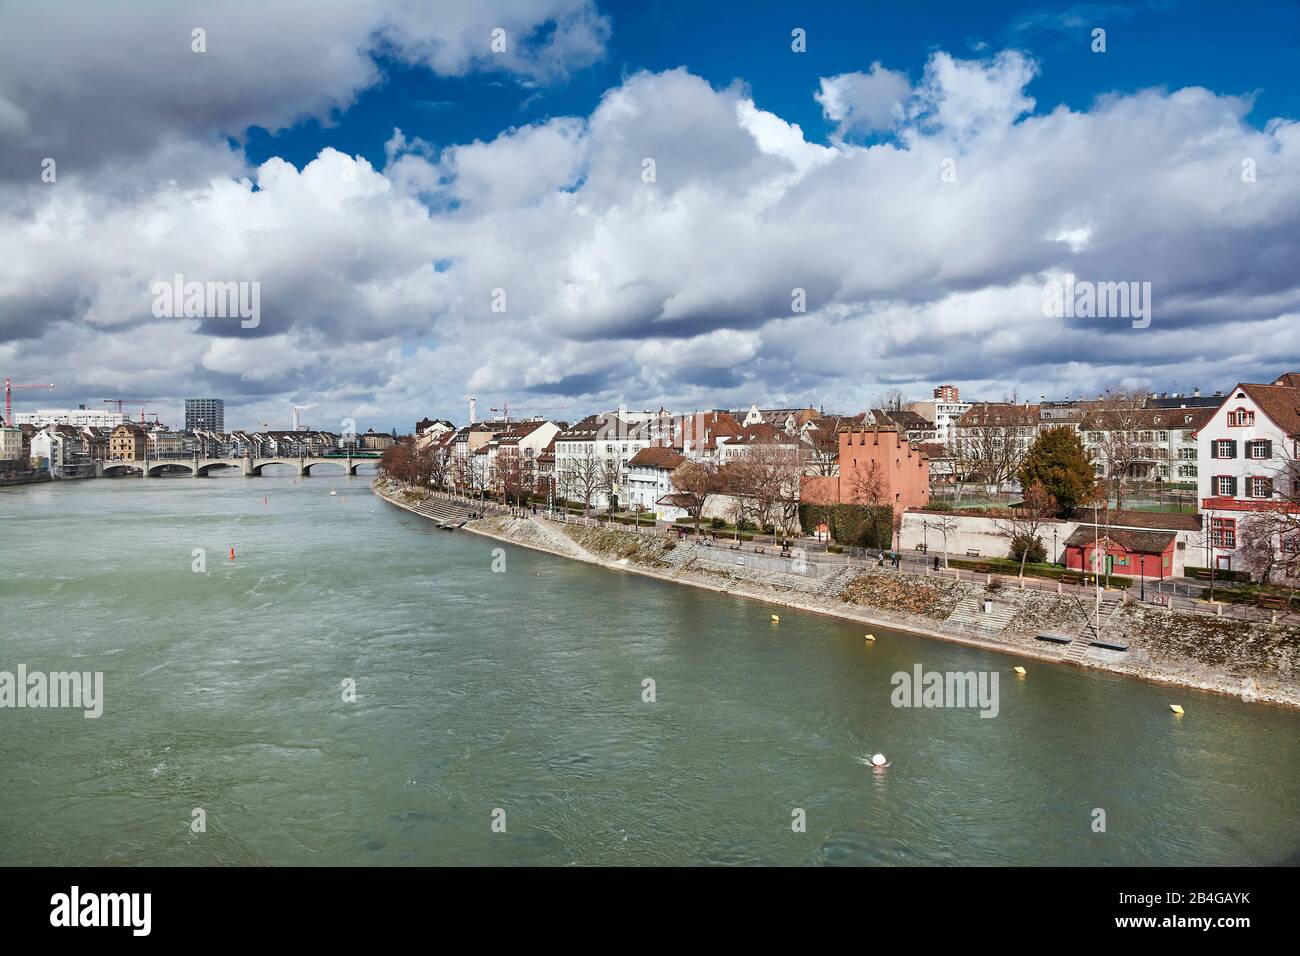 Europe, Switzerland, Basel, banks of the Rhine, panorama of Old Town Kleinbasel, Upper Rhine Trail and Middle Bridge, one of the oldest Rhine crossings between Lake Constance and the North Sea Stock Photo